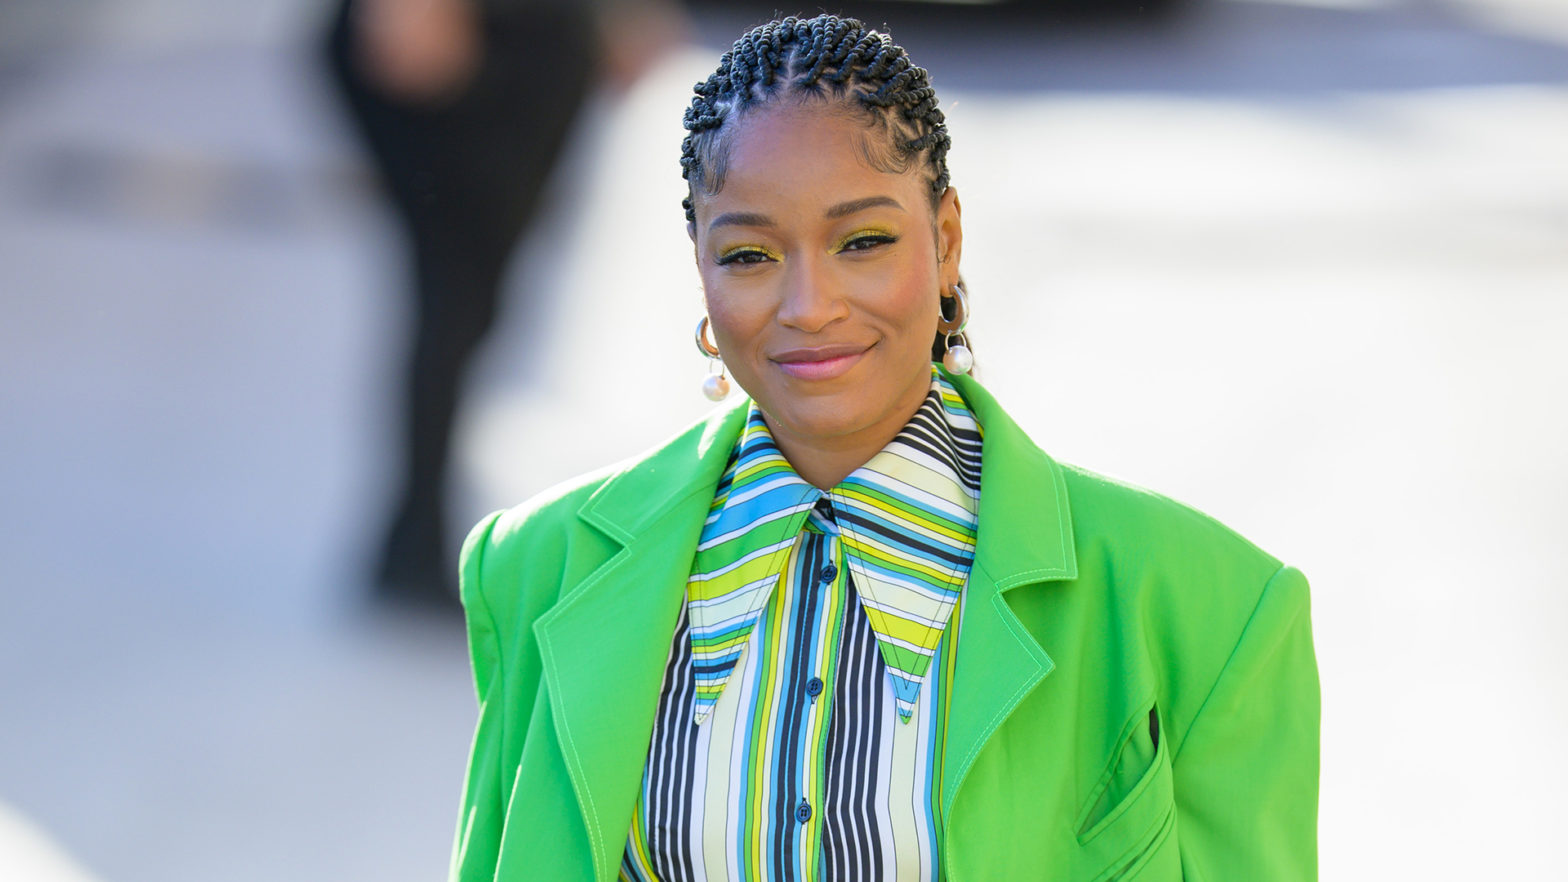 Keke Palmer Says Her Estimated $7.5M Fortune Is Off Base — 'There's Been Times Where It Was Less. Now, It's More'